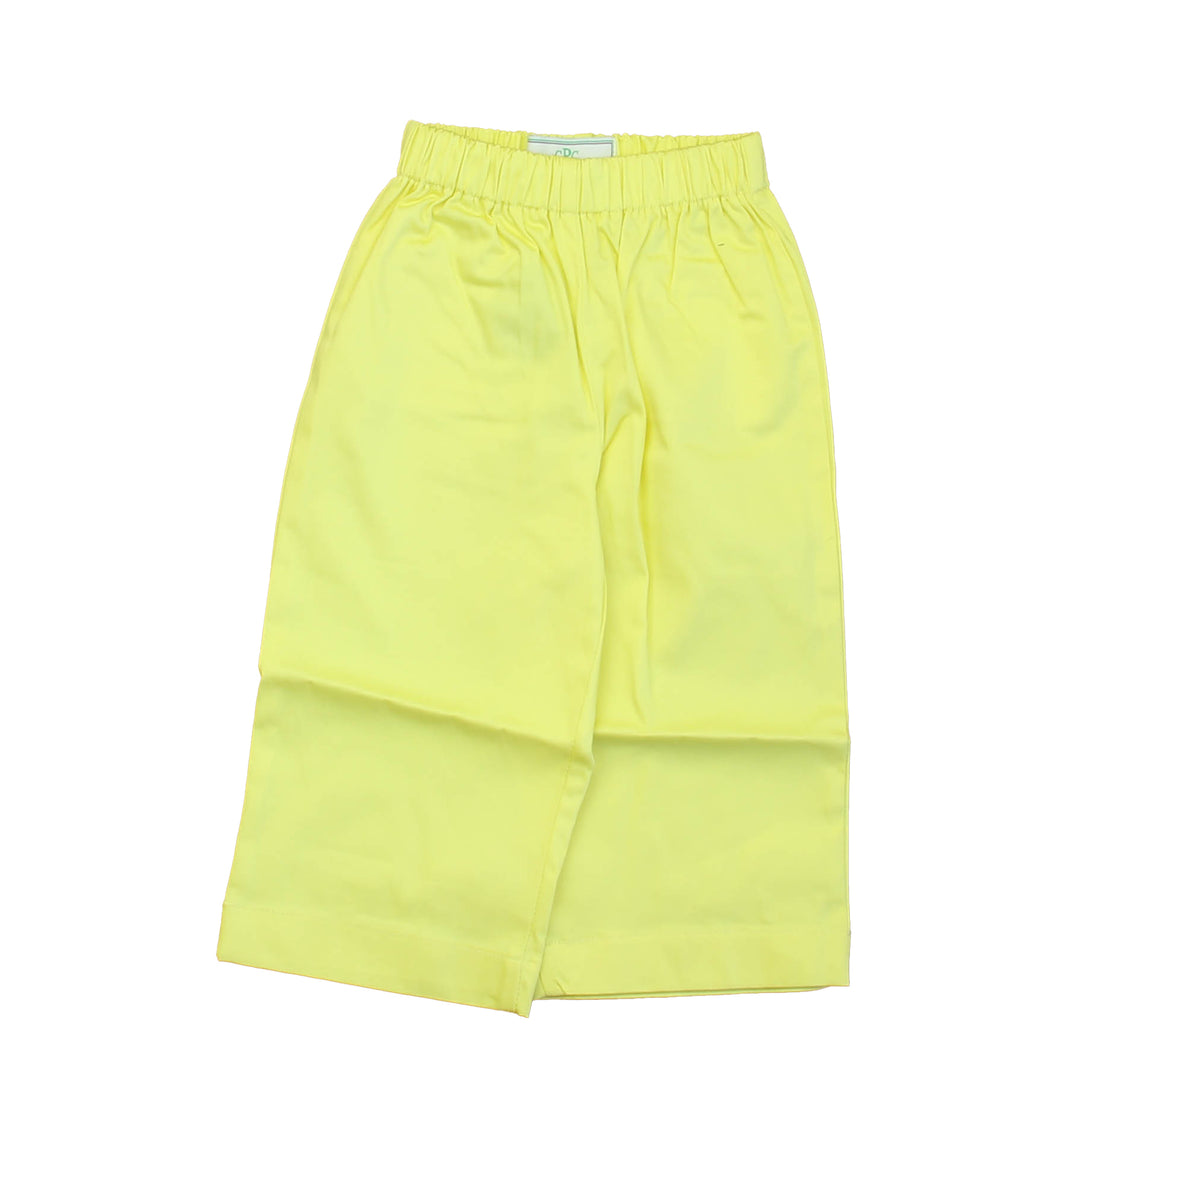 New with Tags: Limelight Yellow Pants -- FINAL SALE